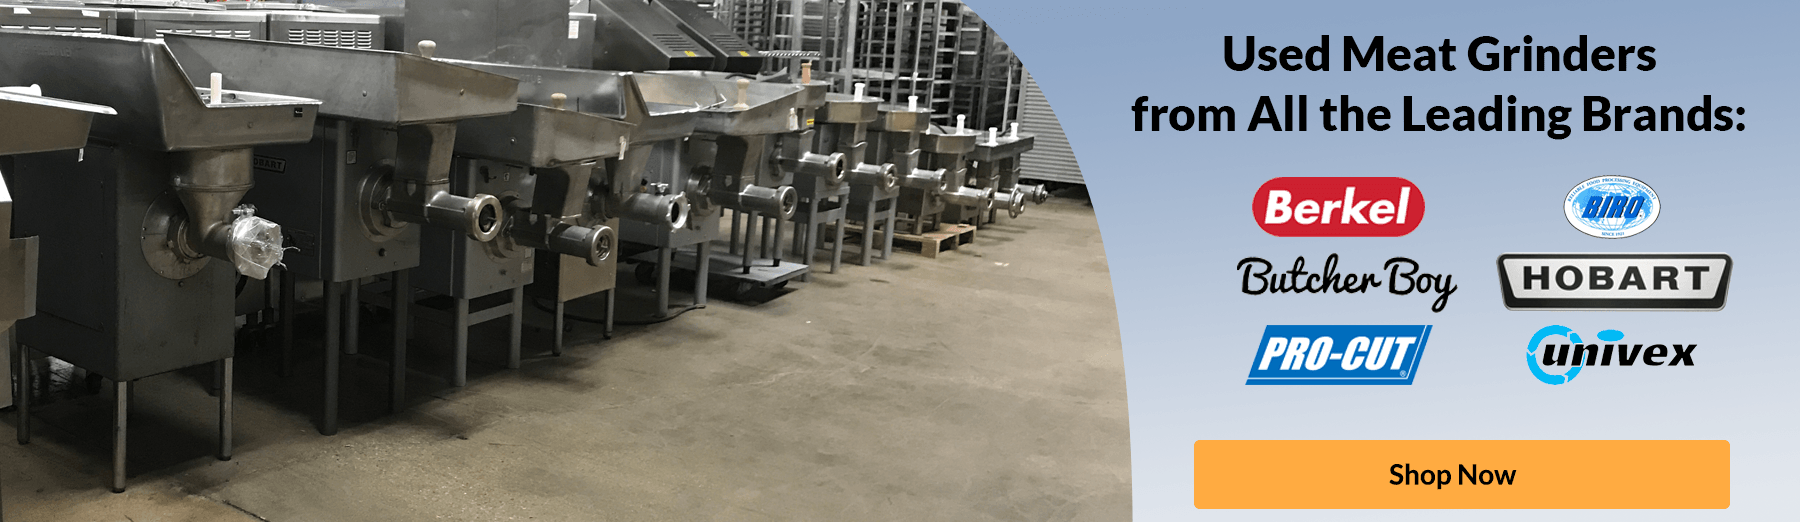 City Food Equipment is a leading seller of commercial meat grinders from all the leading brands: Berkel, Biro, Butcher Boy, Hobart, Pro-Cut, Univex, and more.